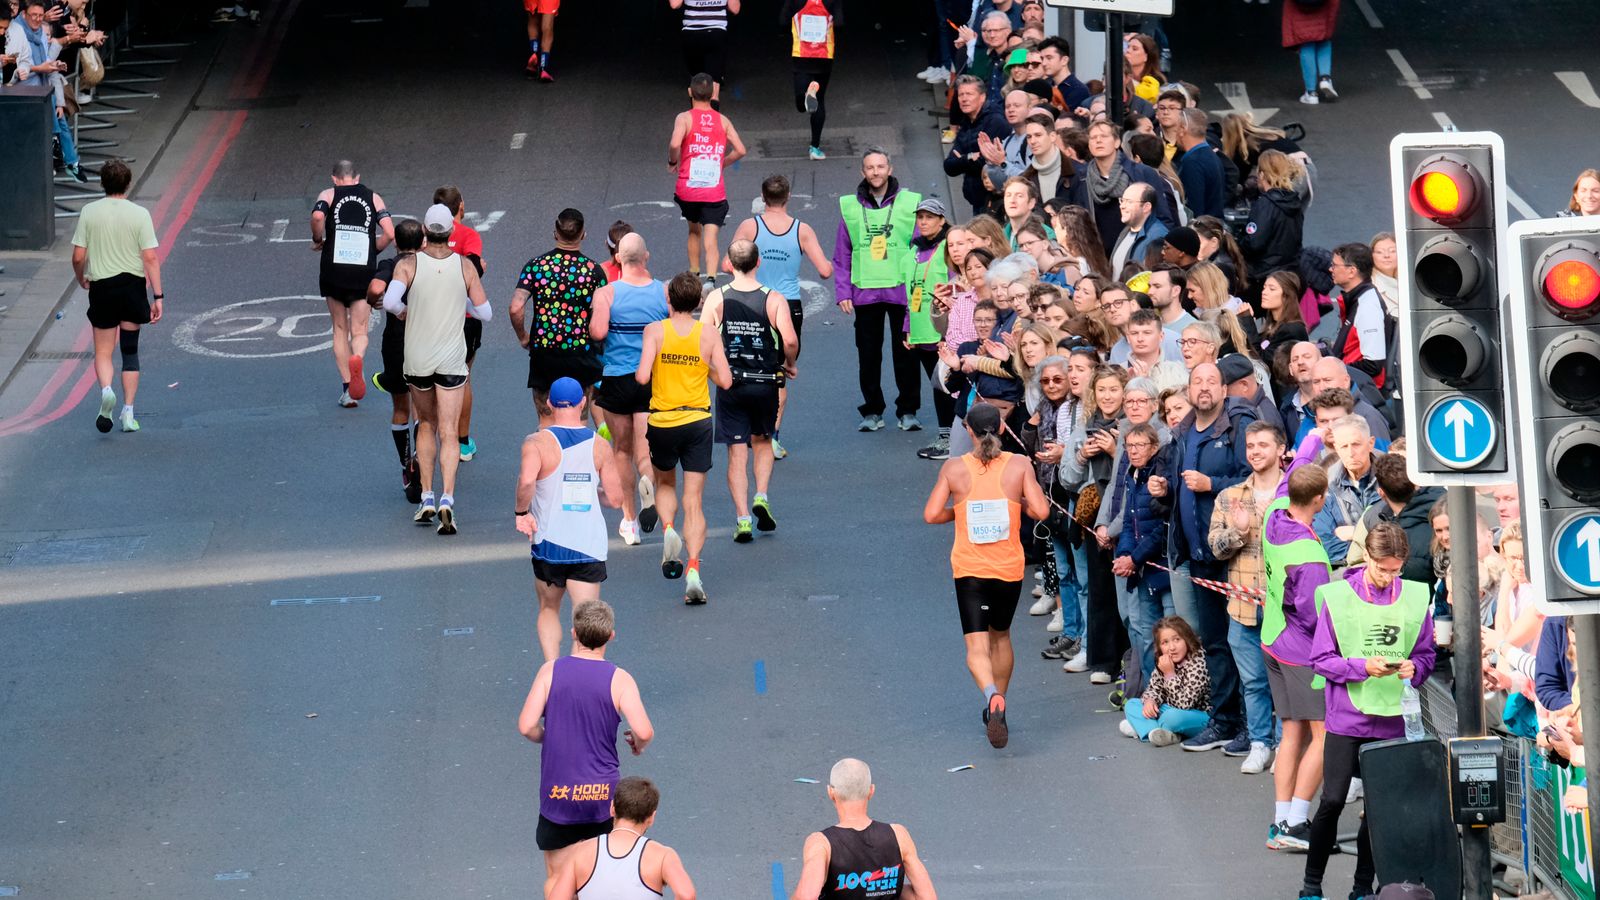 Just Stop Oil refuses to rule out London Marathon disruption amid weekend of protests